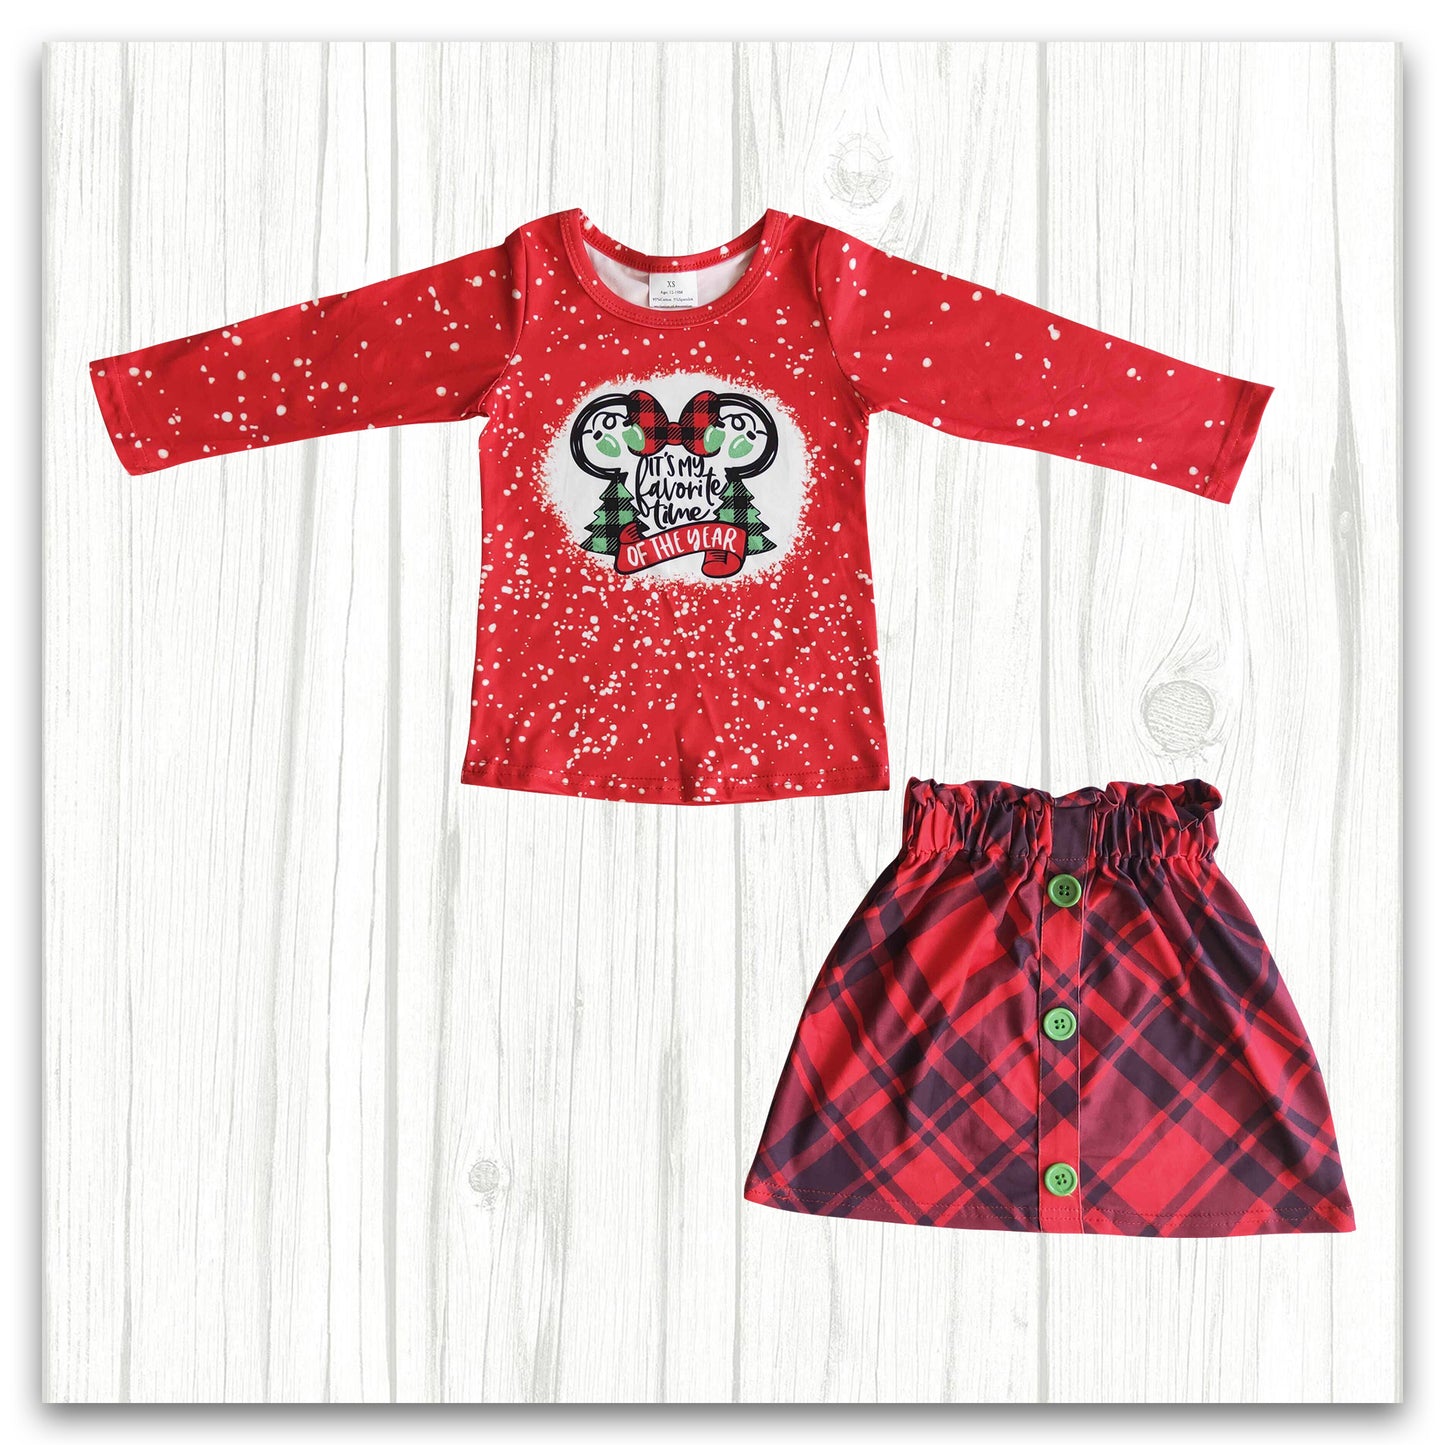 Merry Christmas Red Plaid Skirt Outfit